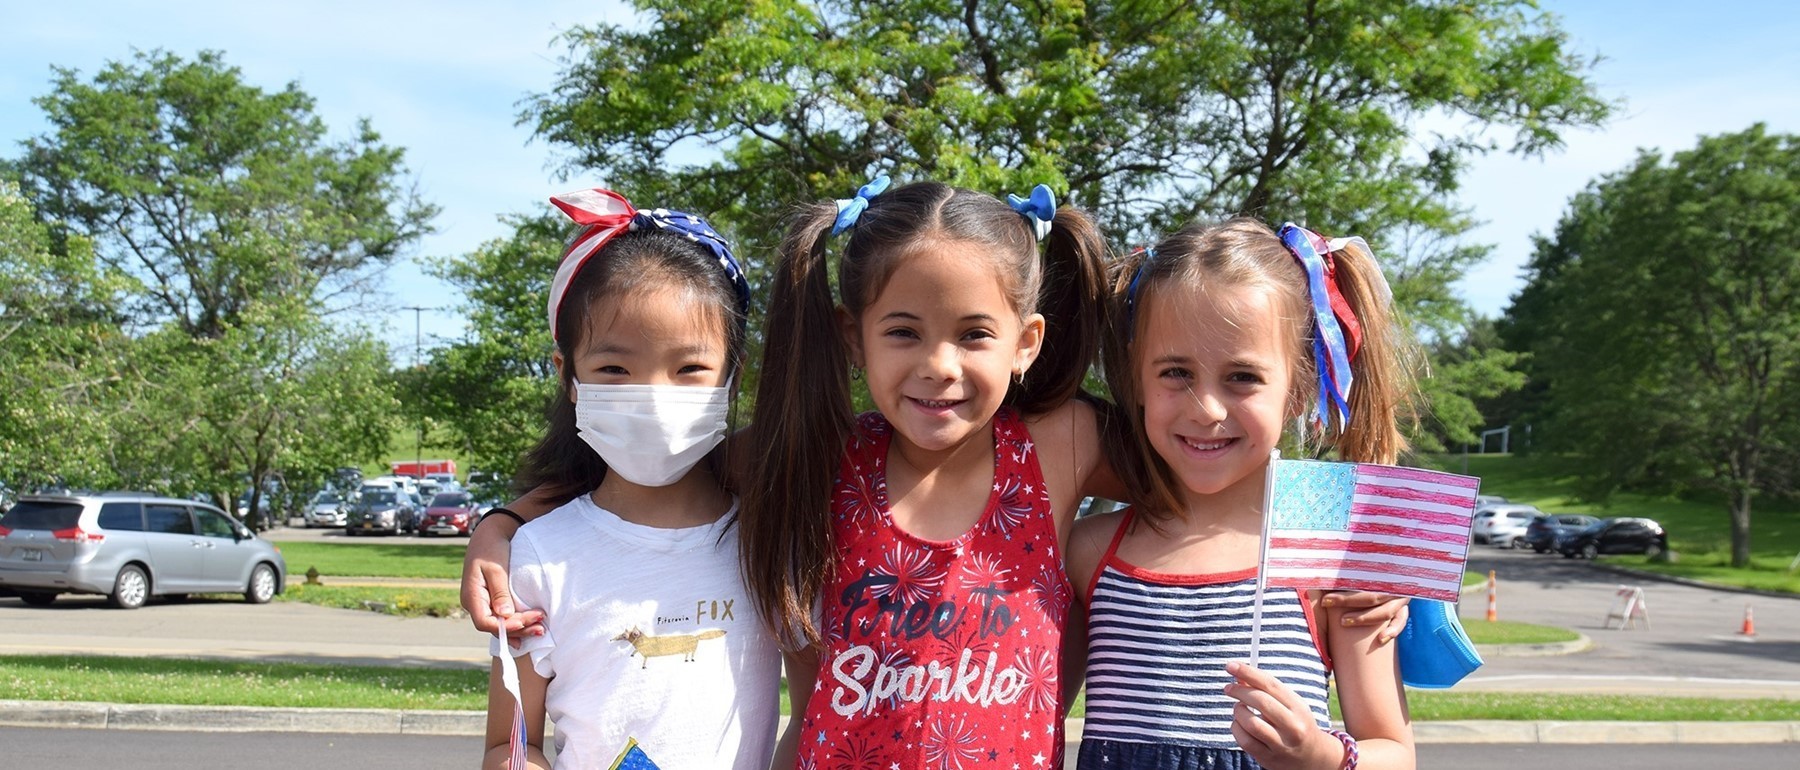 Three little girls from African Road Elementary are dressed in red, white and blue attire and accessories and two hold paper flags on popsicle sticks.